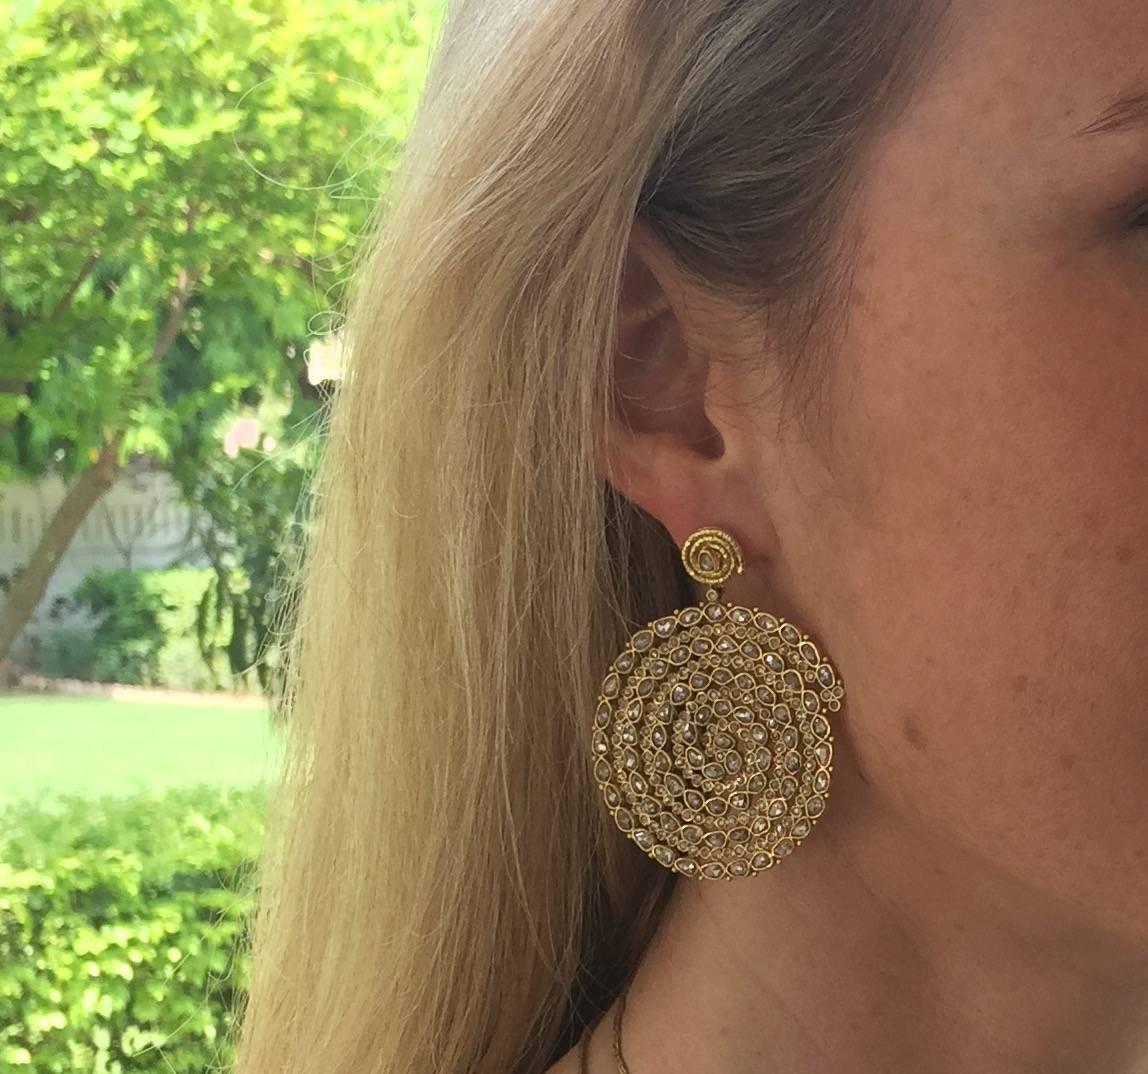 Rose Cut Diamond Spiral Earrings on 18 Karat Gold. 

They Sparkle In The Most Beautiful Way And Are Designed To Be Reminiscent Of The Stars in The Galaxy. A Video Of The Earrings Can Be Found On My 1st Dibs Store Front Profile. 

The Earrings Are